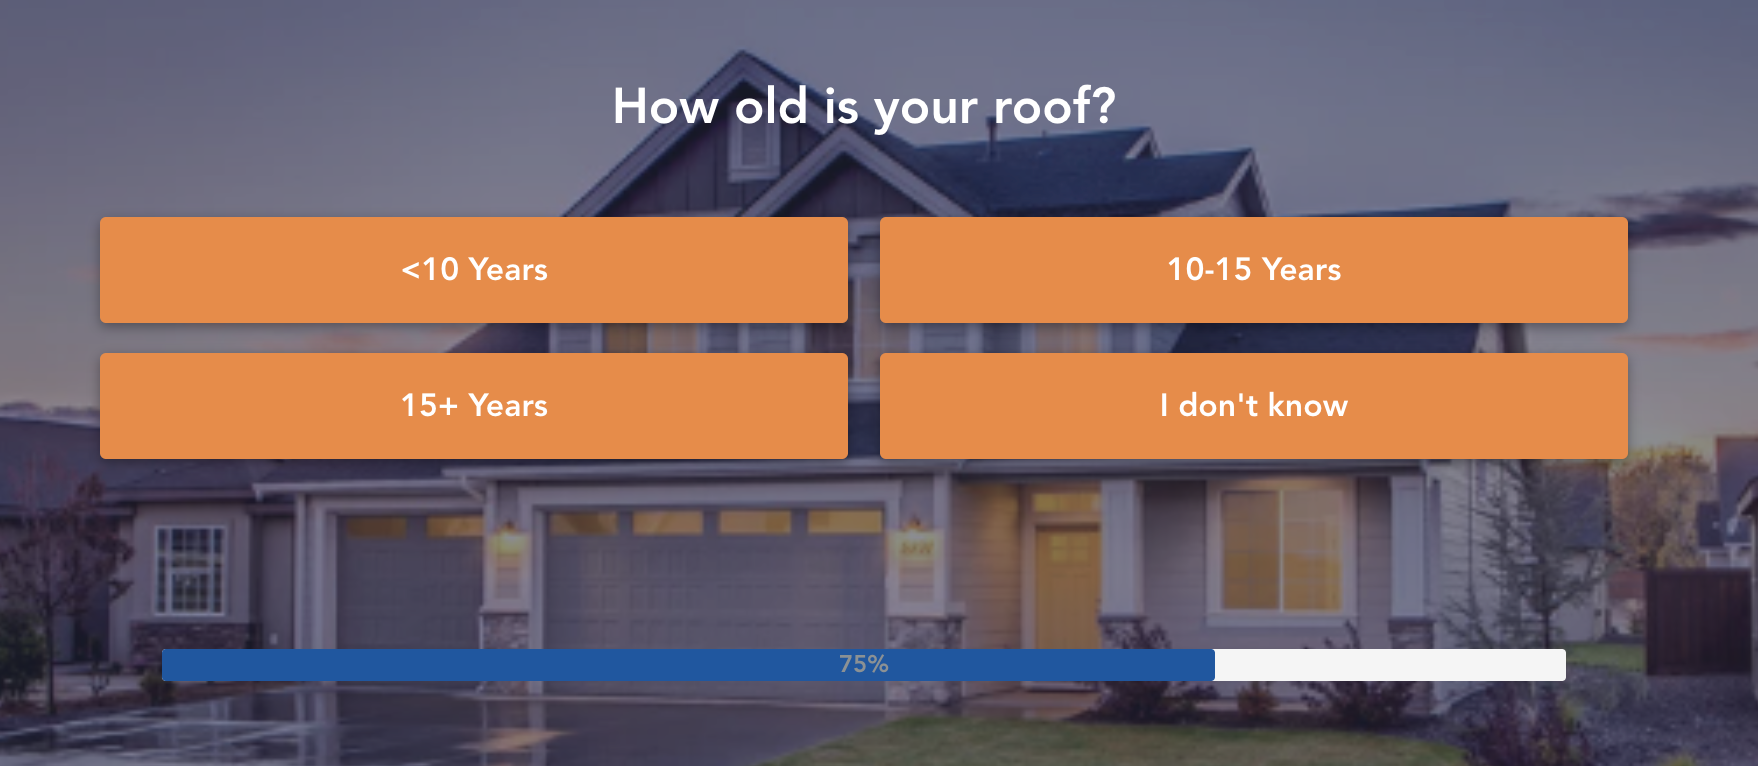 Ask the solar prospect the age of their form